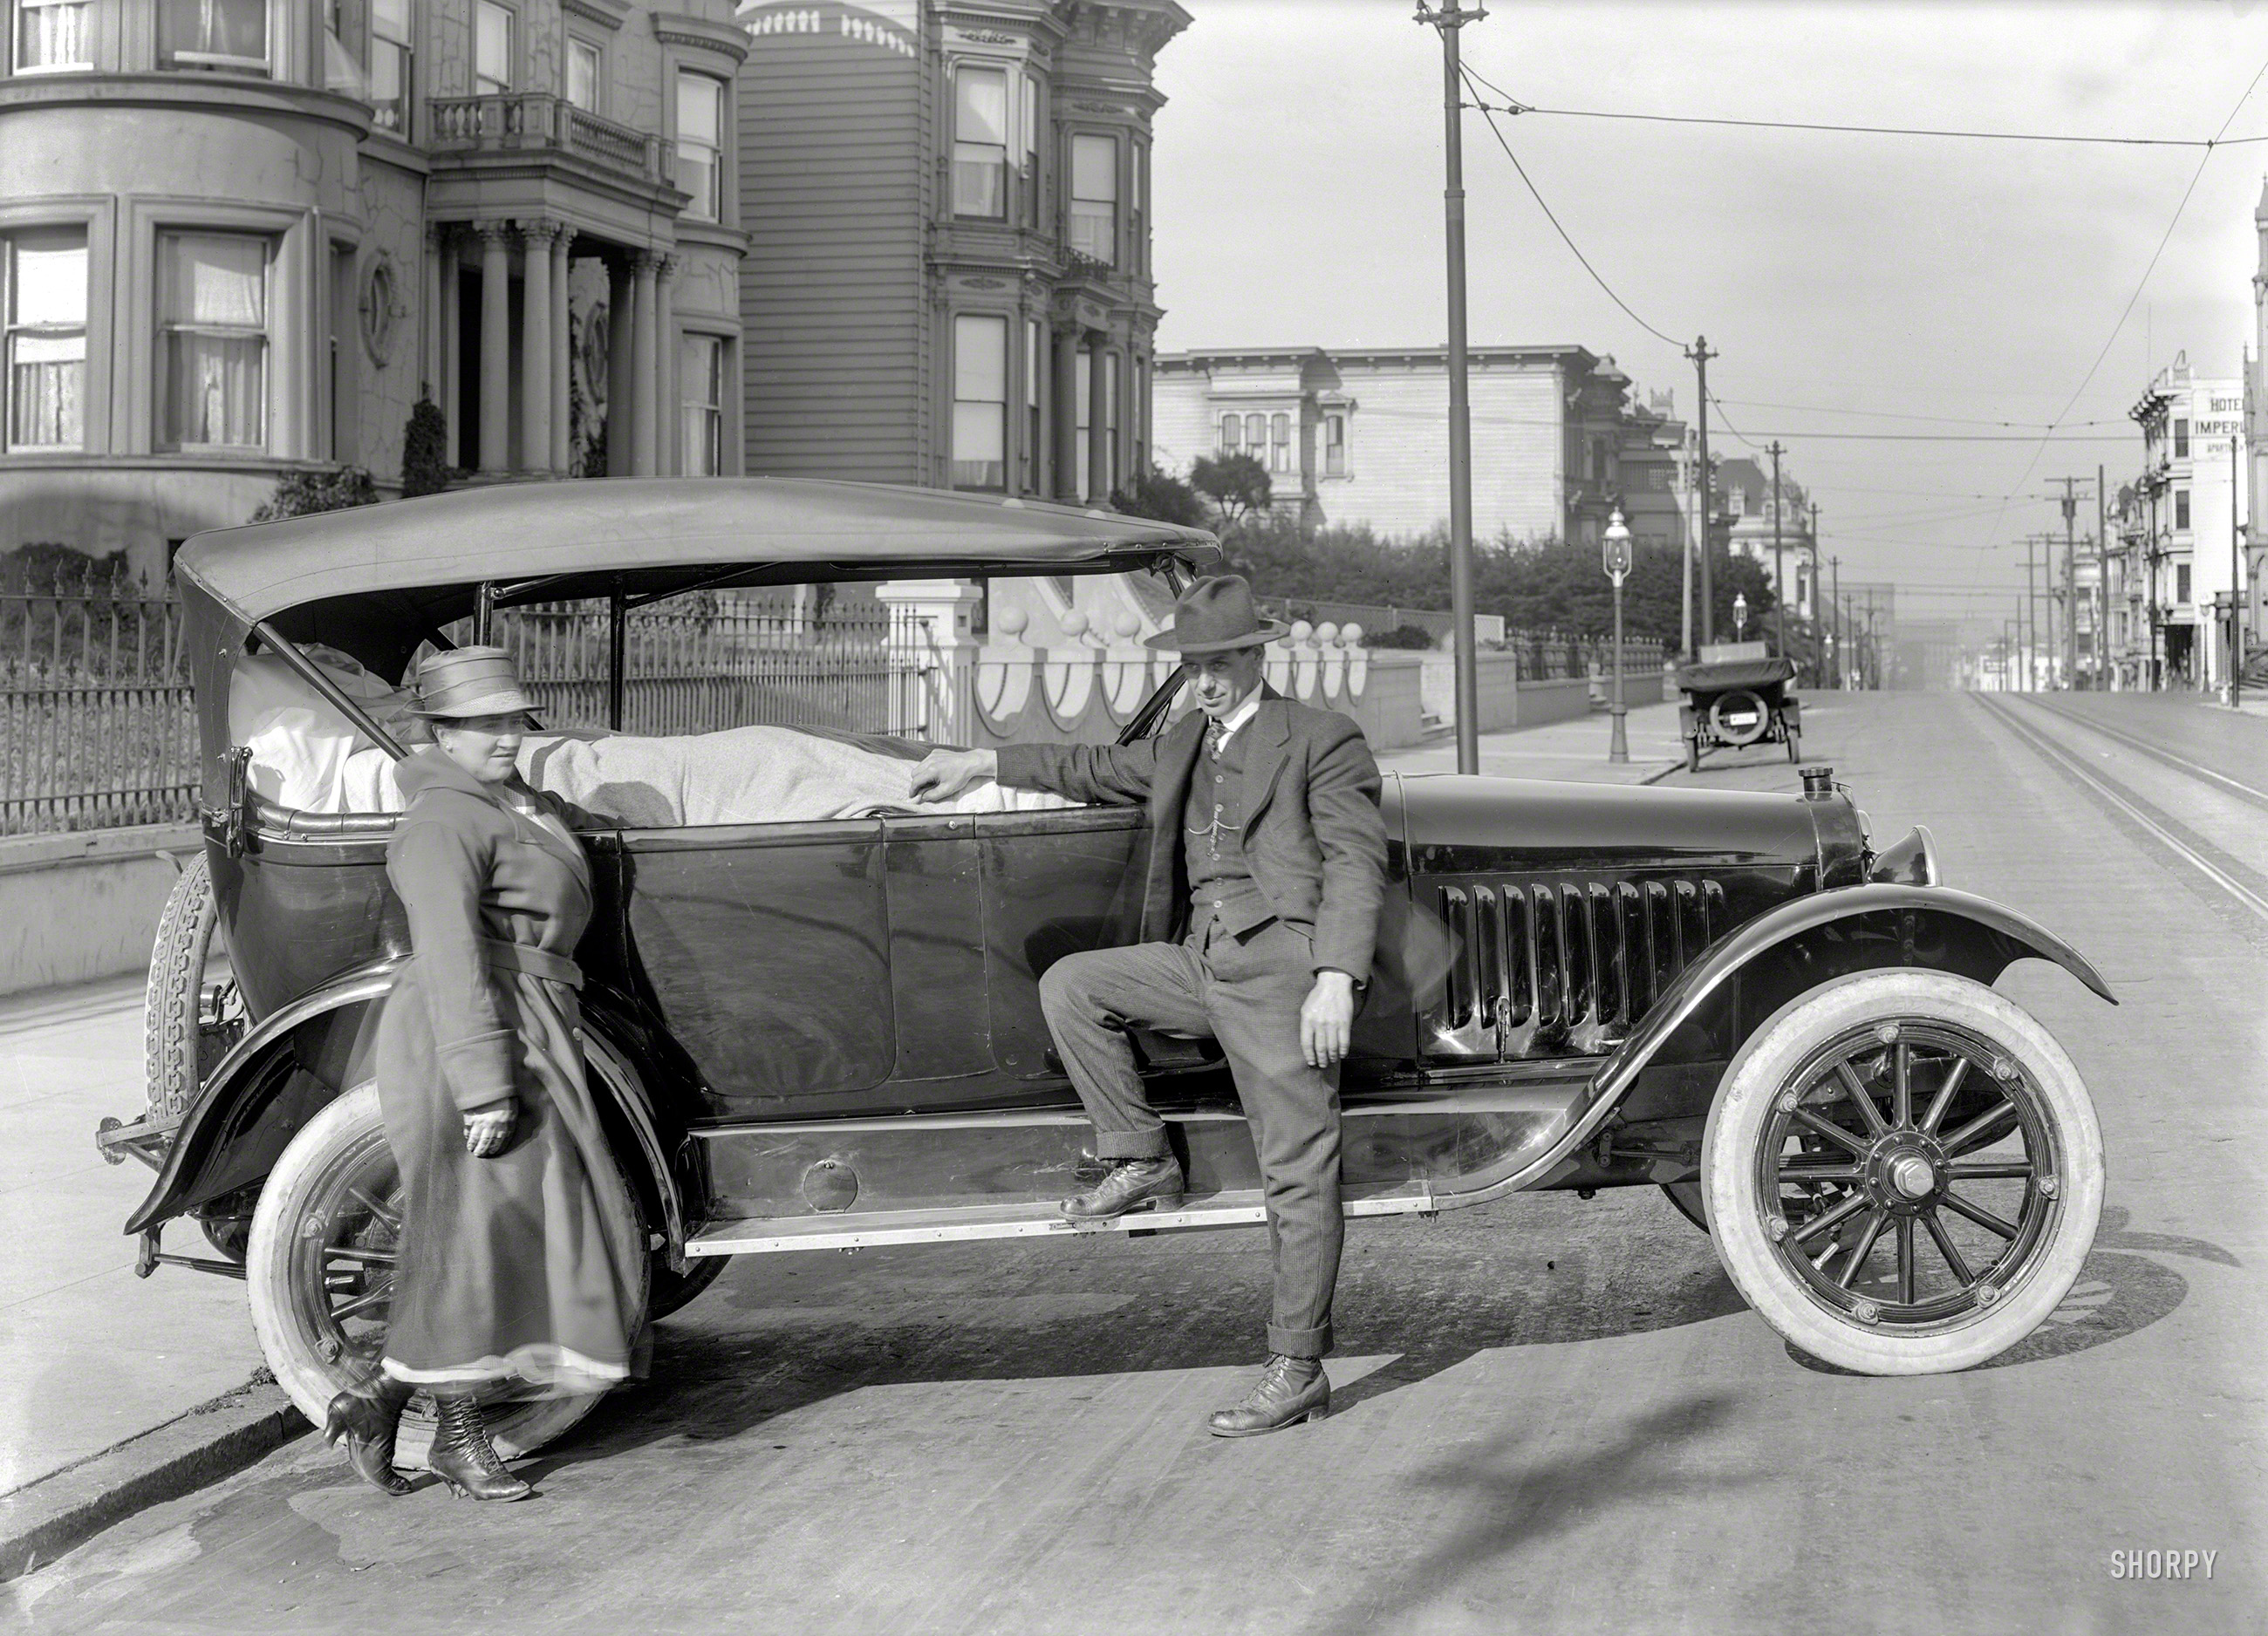 San Francisco circa 1920. "Chalmers touring car on Eddy Street." Equipped with what seems to be a bed. 5x7 negative by Christopher Helin. View full size.